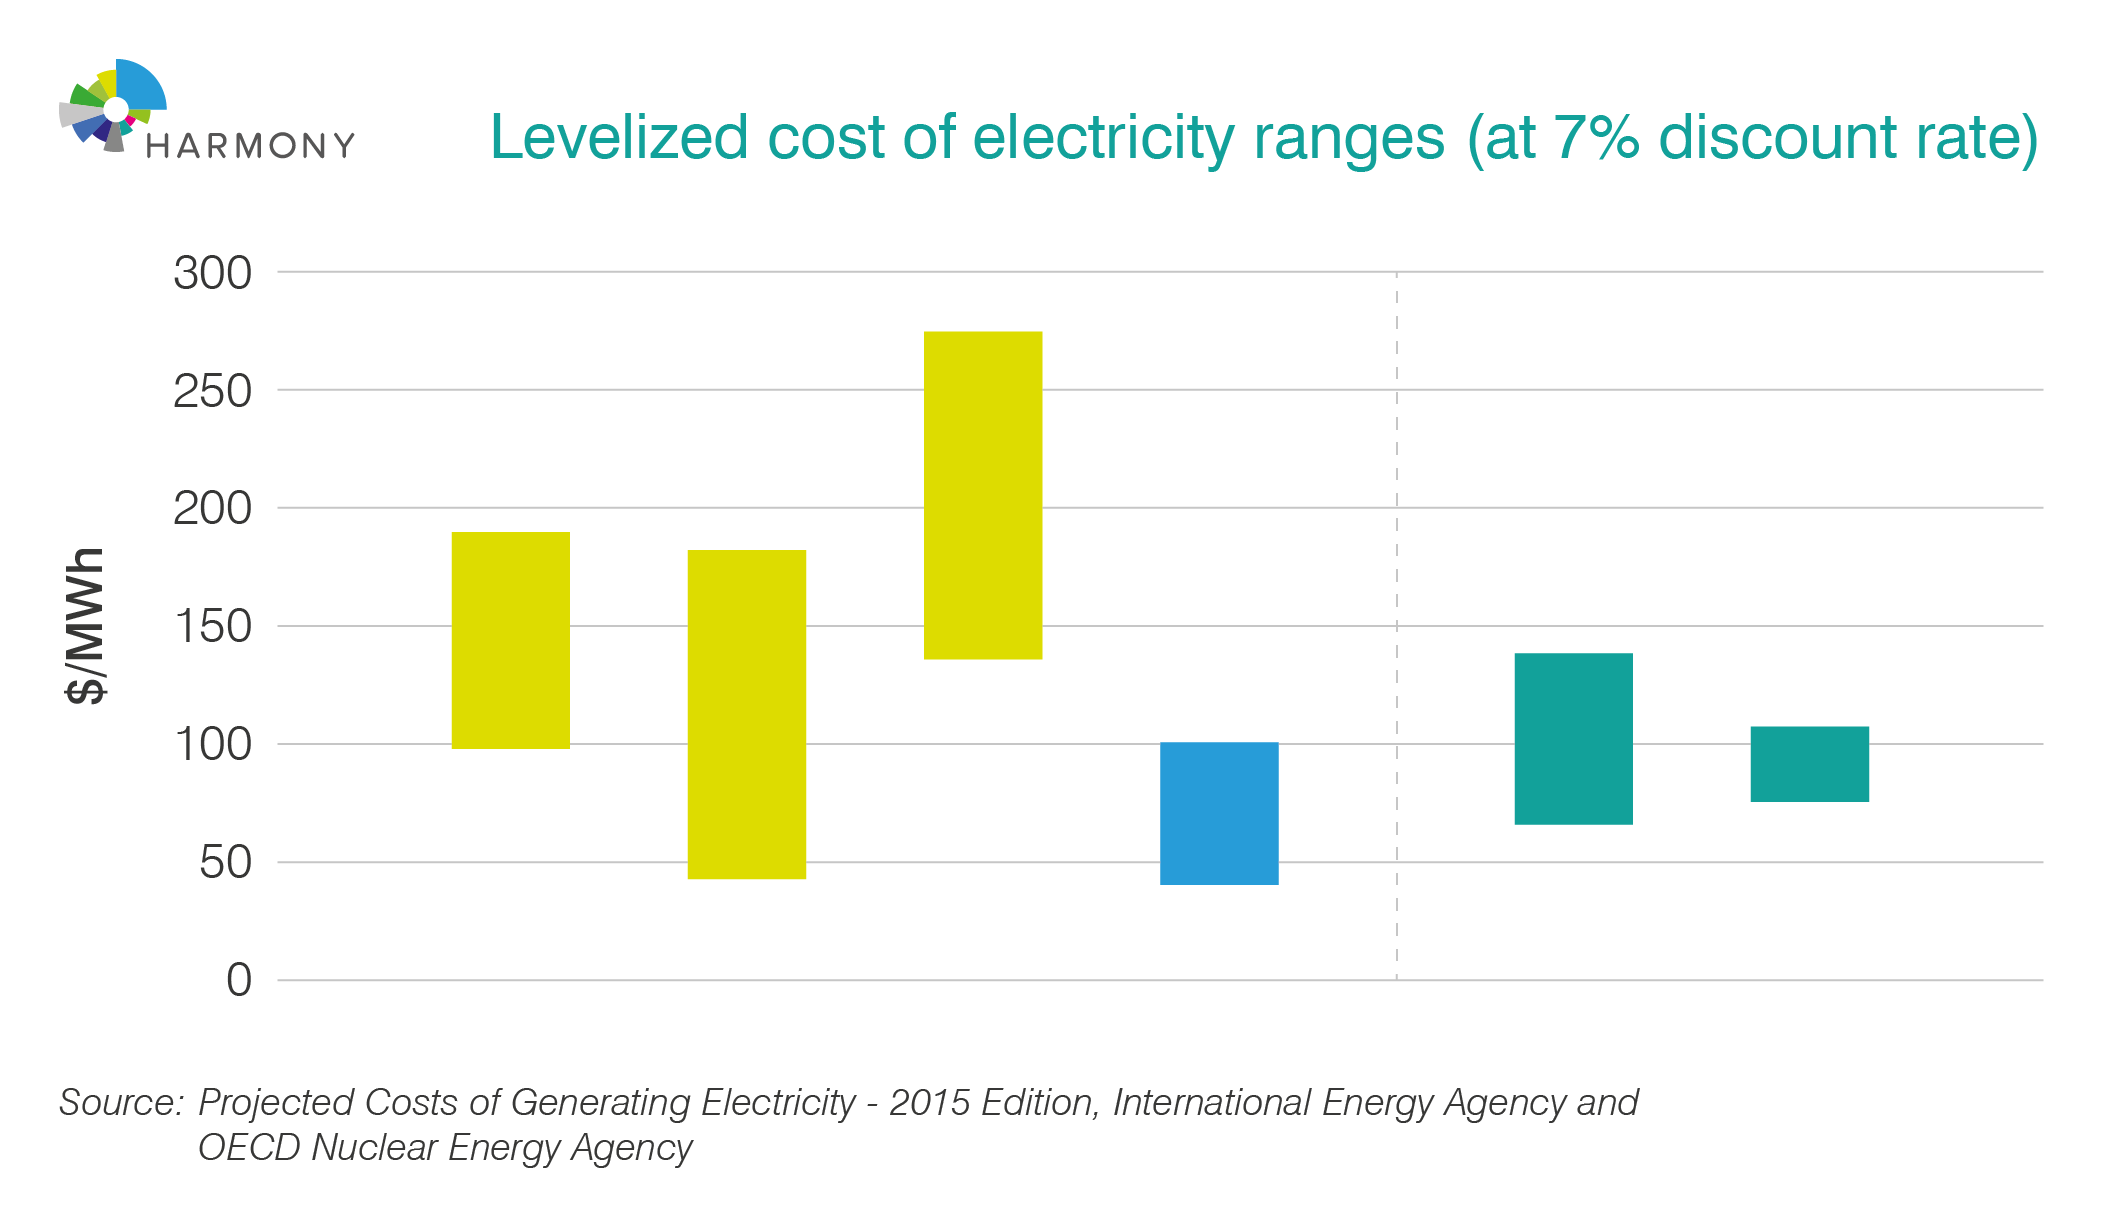 Levelized cost of electricity ranges (at 7% discount rate)